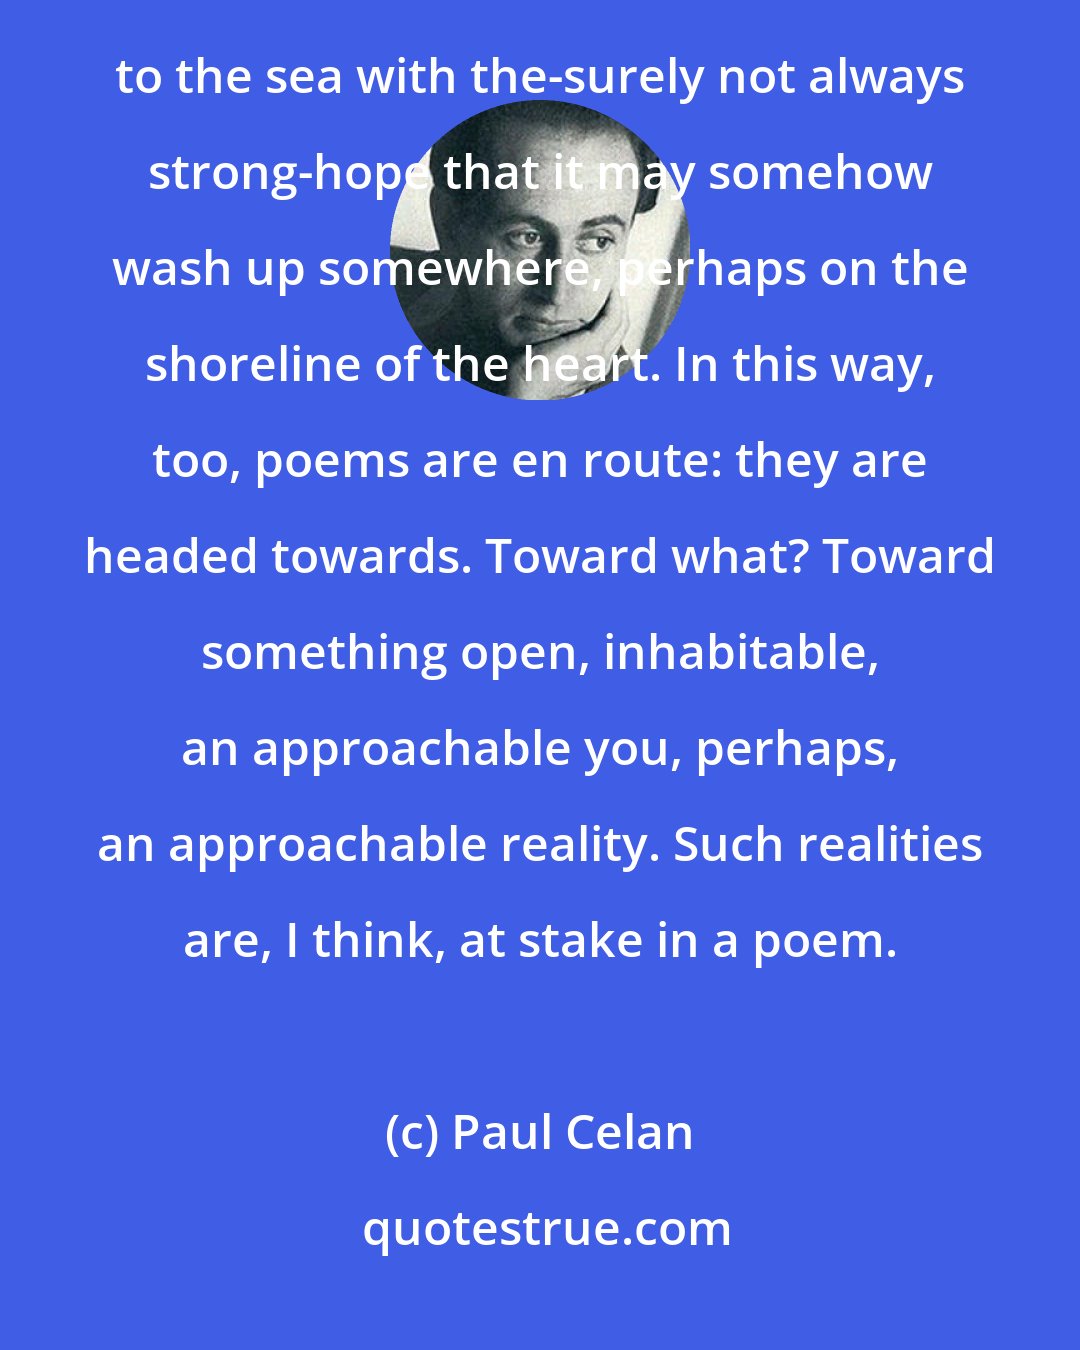 Paul Celan: A poem, being an instance of language, hence essentially dialogue, may be a letter in a bottle thrown out to the sea with the-surely not always strong-hope that it may somehow wash up somewhere, perhaps on the shoreline of the heart. In this way, too, poems are en route: they are headed towards. Toward what? Toward something open, inhabitable, an approachable you, perhaps, an approachable reality. Such realities are, I think, at stake in a poem.